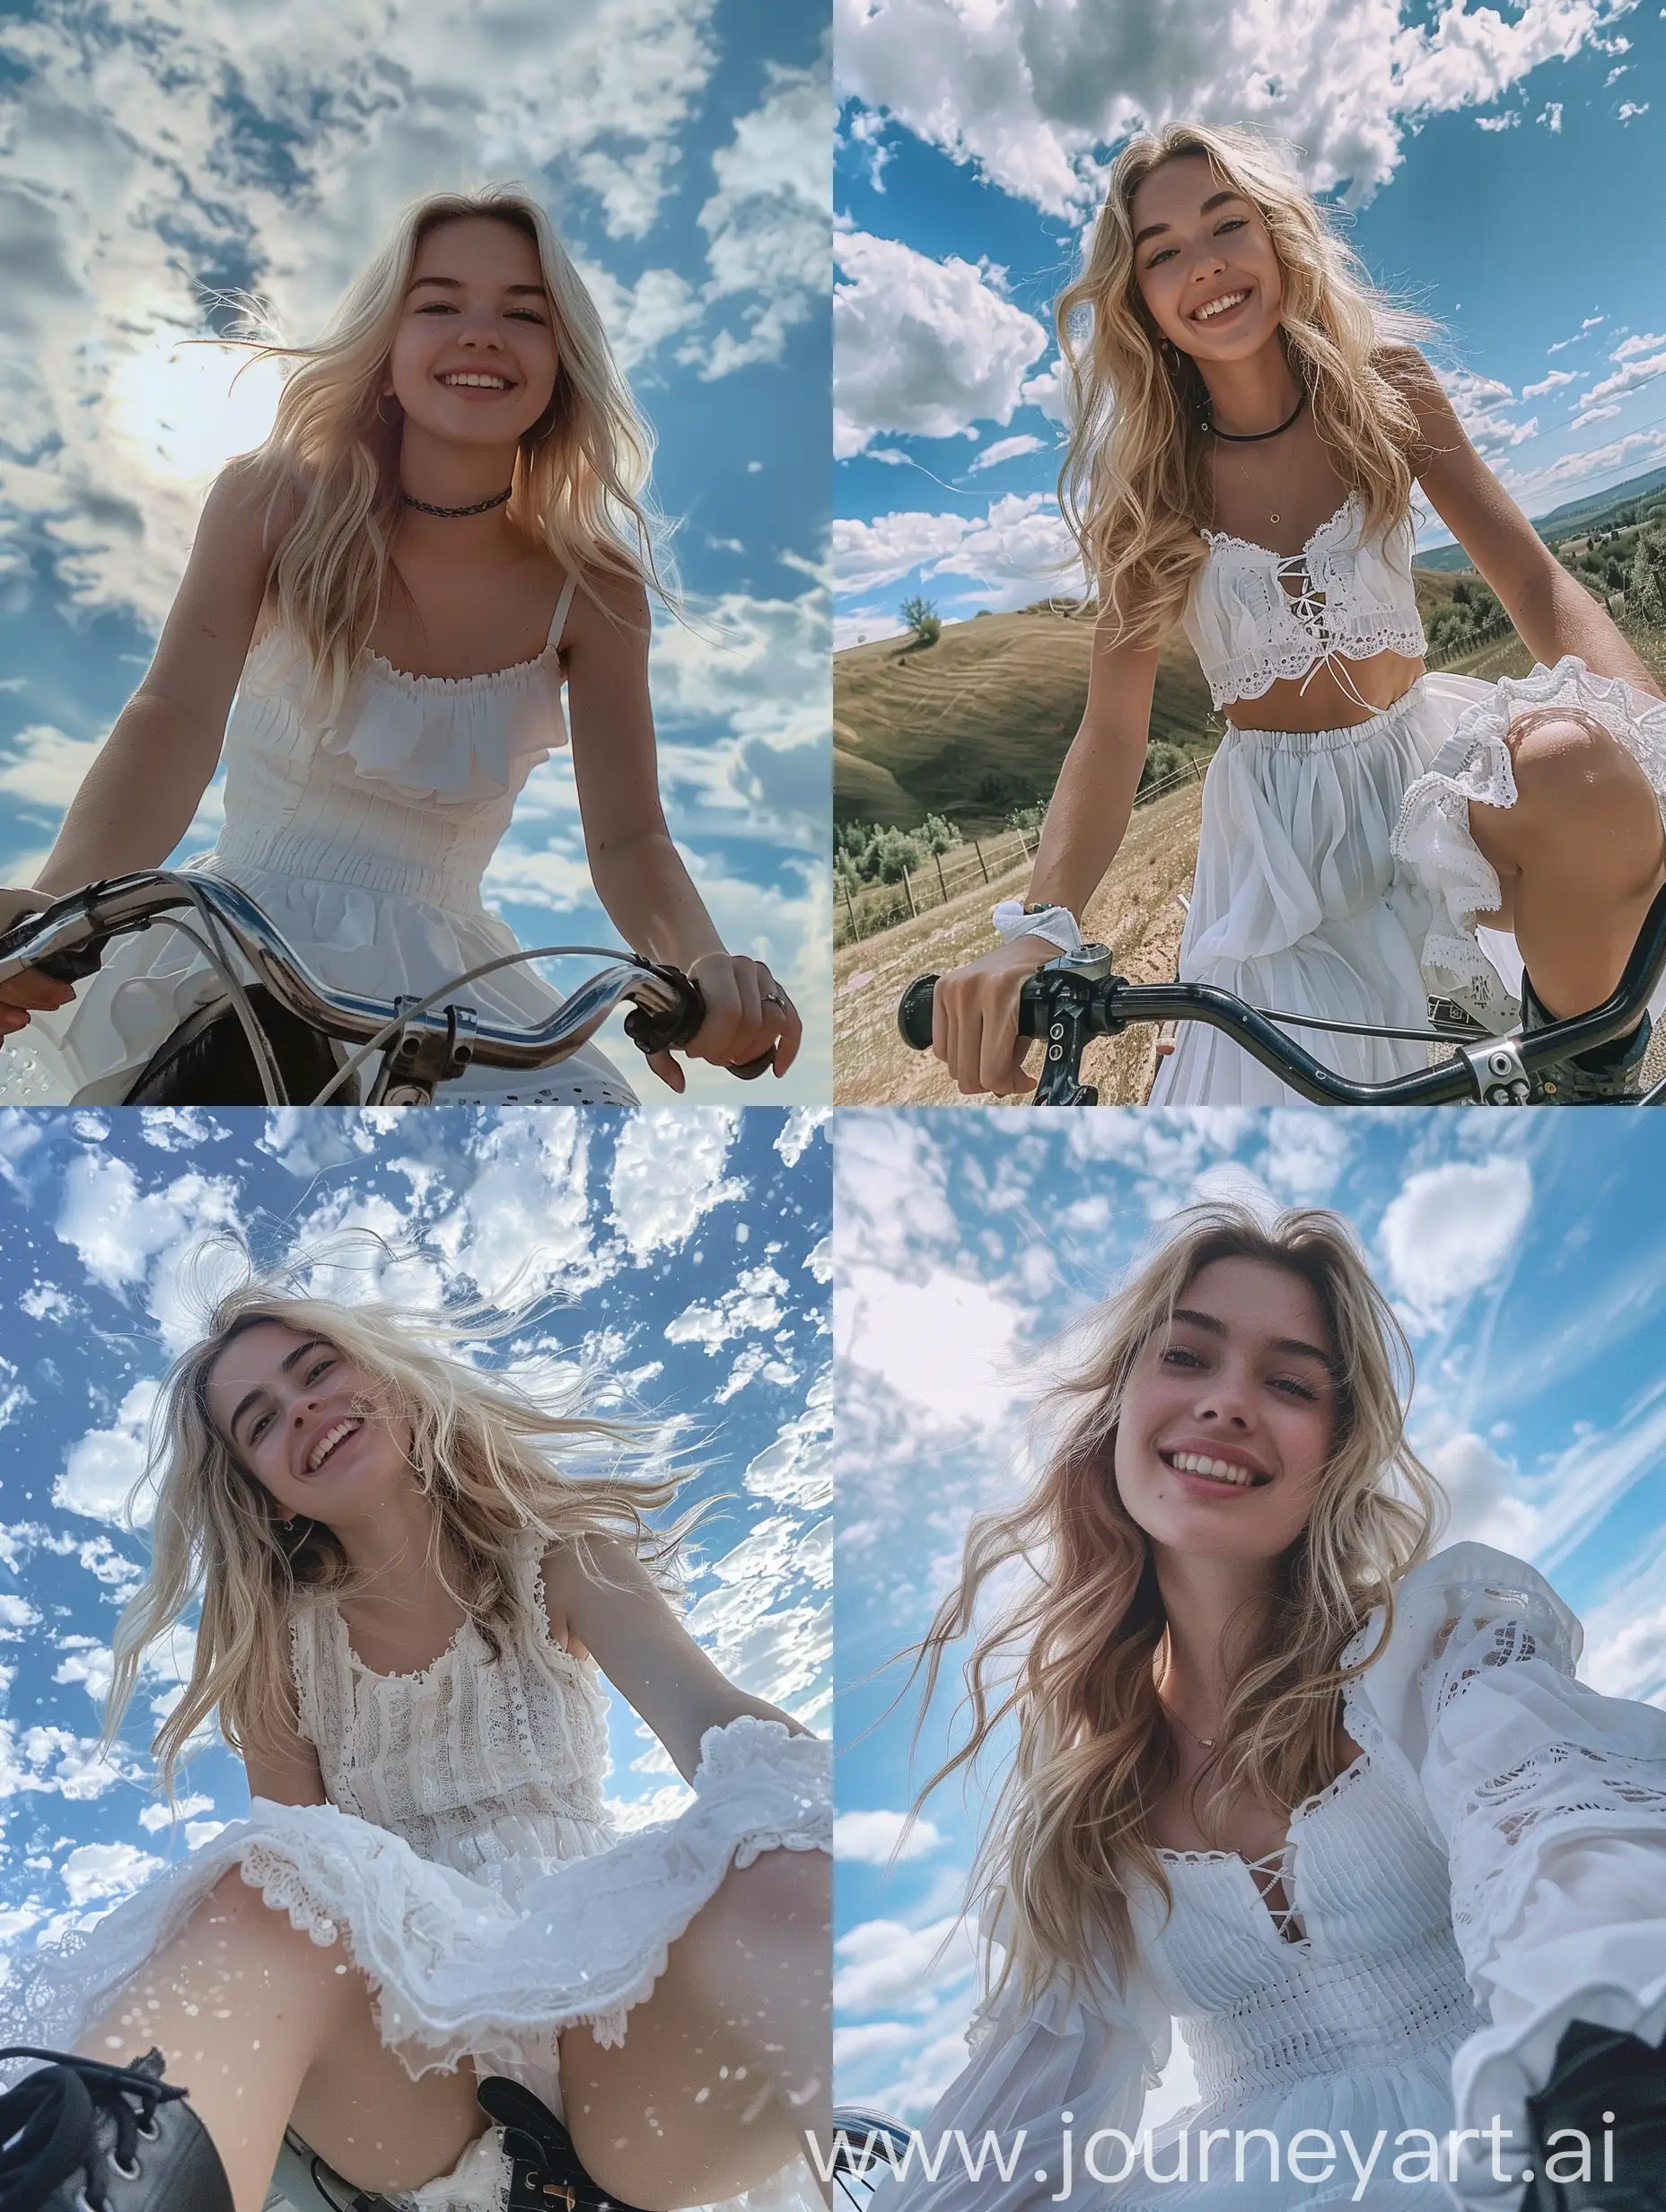 a girl, 22 years old, blonde hair, white dress, black boots, smiling, , sitting on a bicycle, no effects, selfie , iphone selfie, no filters, natural , iphone photo natural, camera down angle, sky view, down view